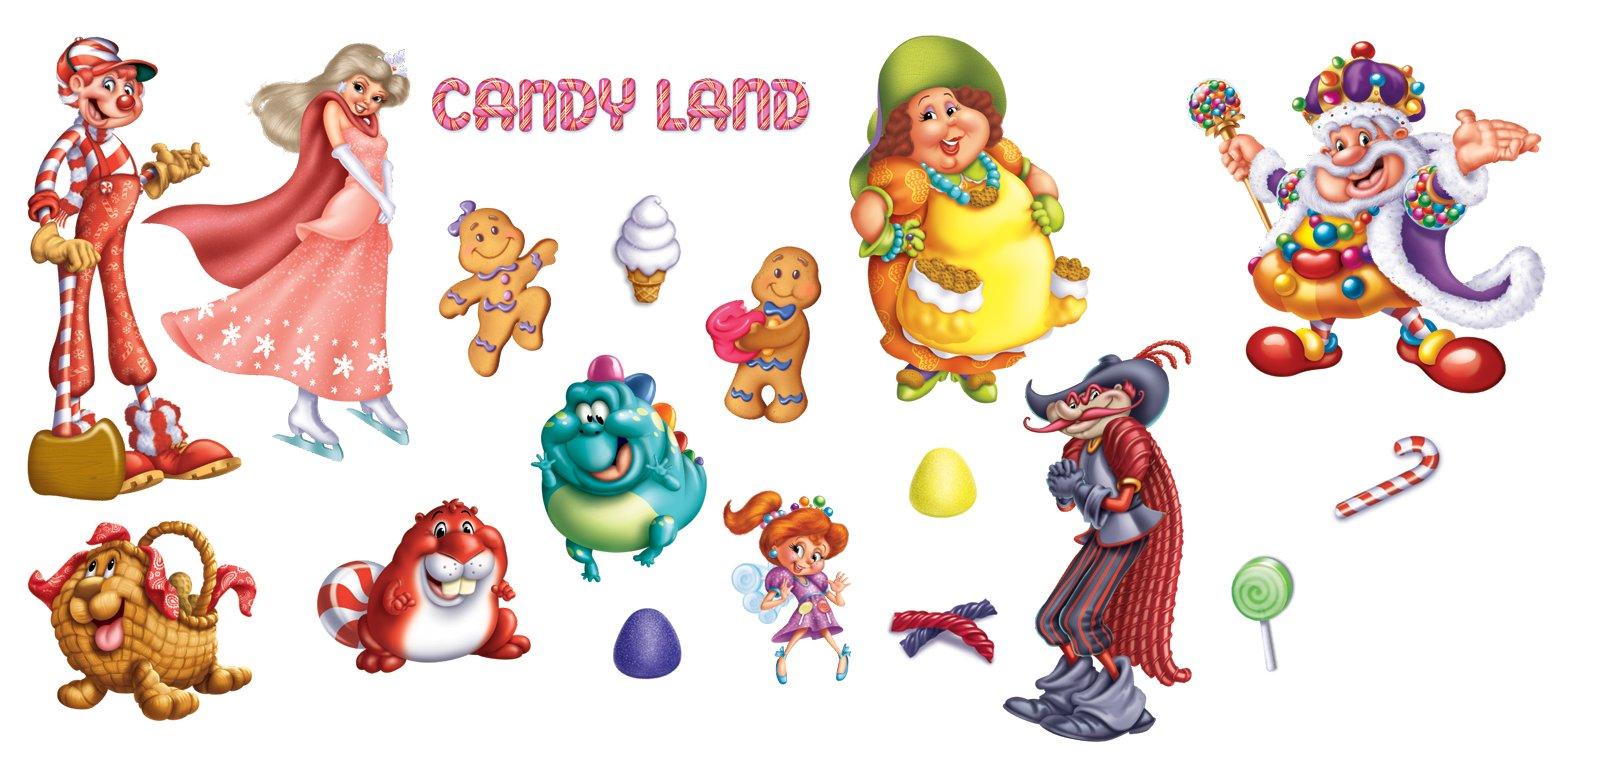 Entry About Candy Land